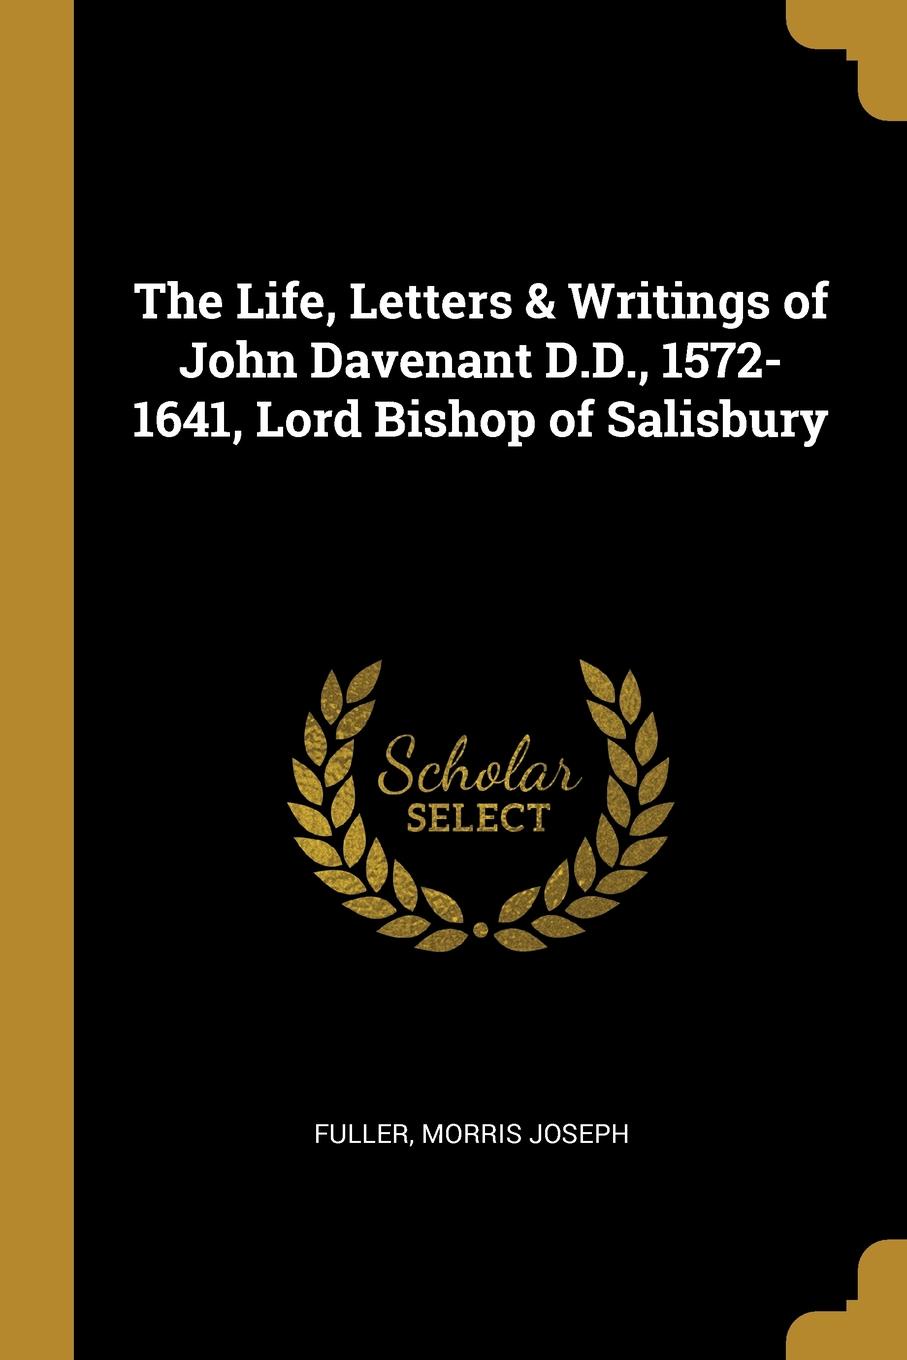 The Life, Letters . Writings of John Davenant D.D., 1572-1641, Lord Bishop of Salisbury